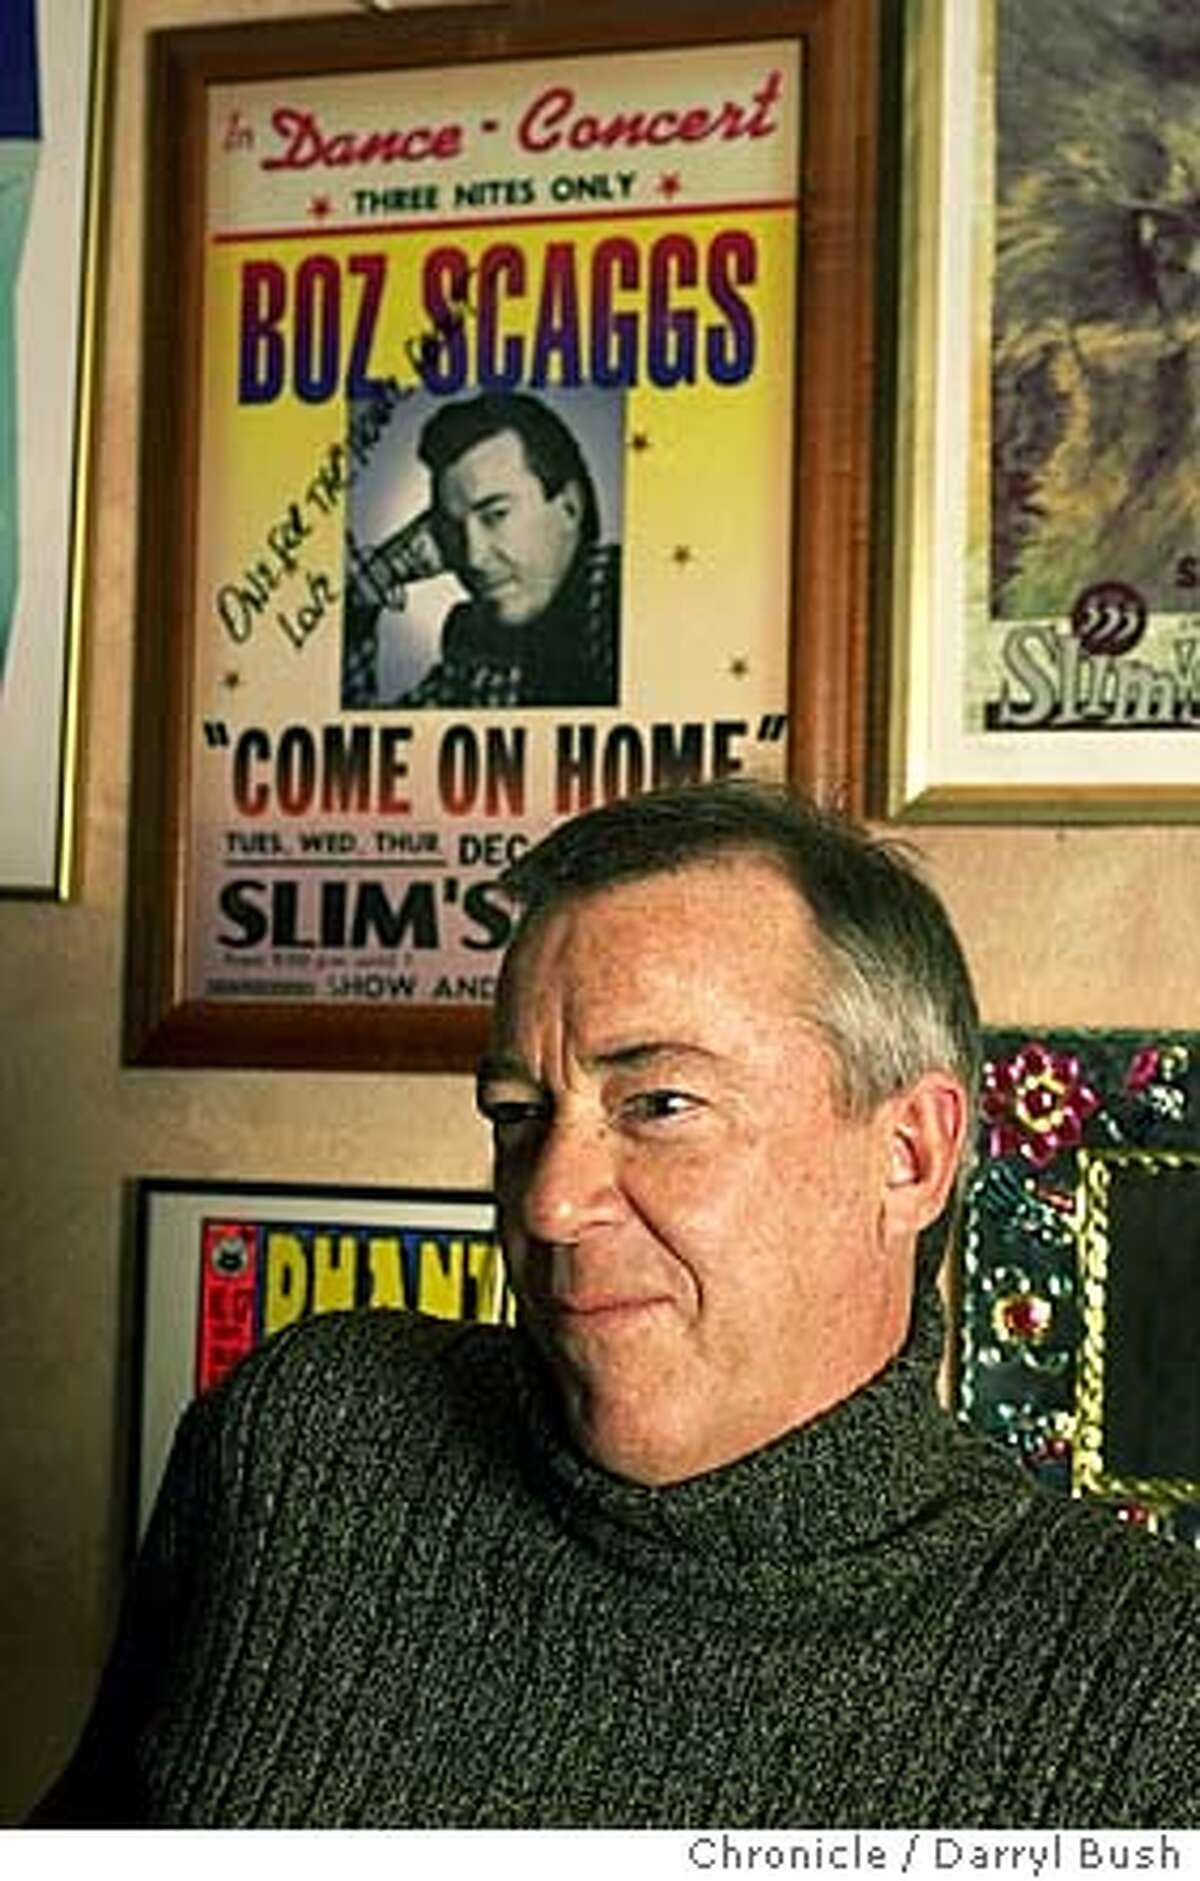 Boz Scaggs with a poster of concert he played in the background, inside the basement office of Slim's nightclub in San Francisco. Chronicle Photo by Darryl Bush